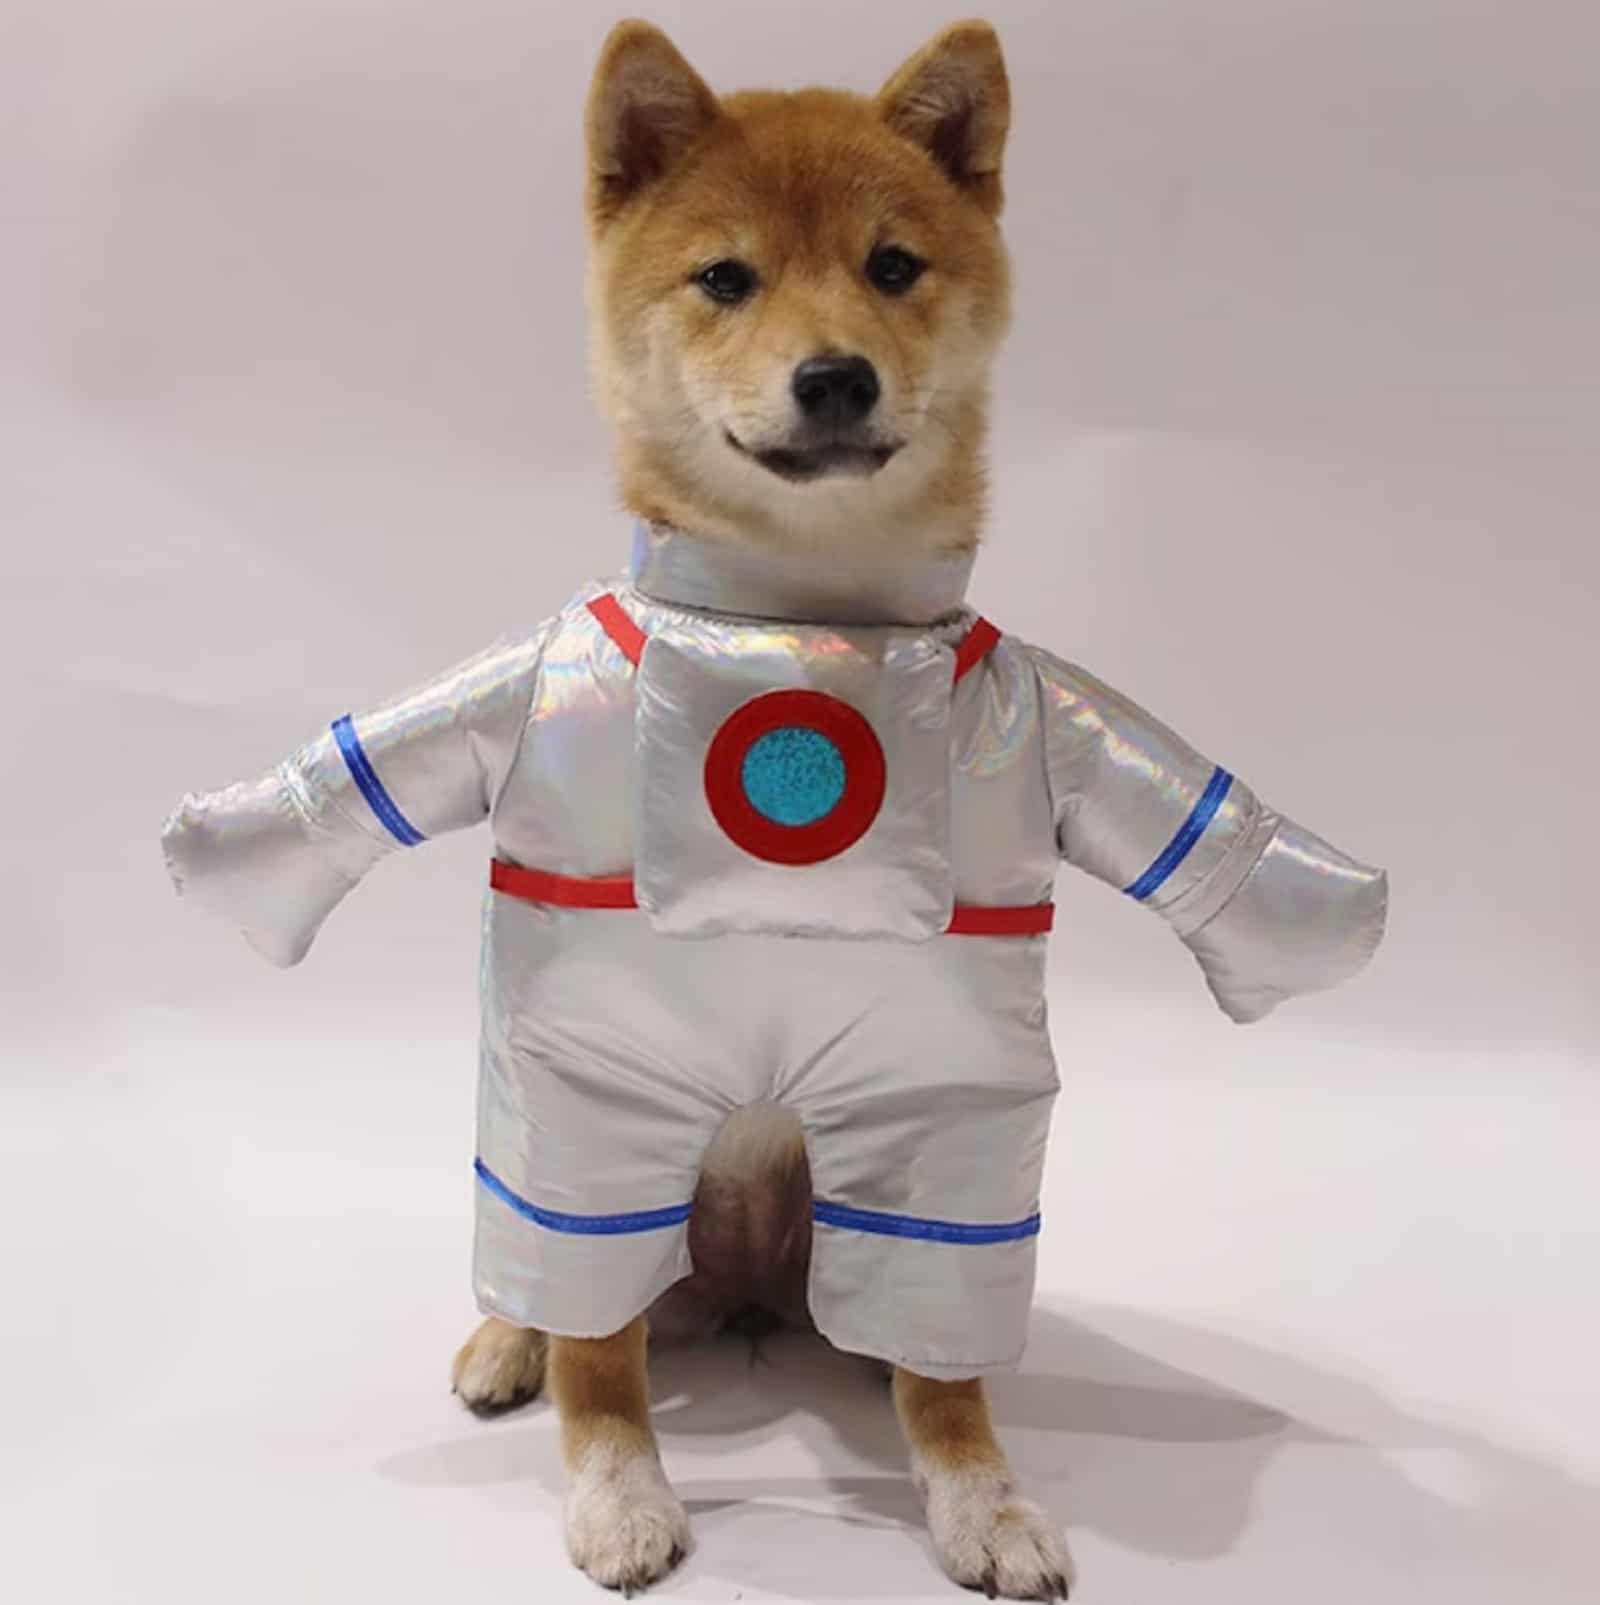 dog wearing astronaut costume posing for camera